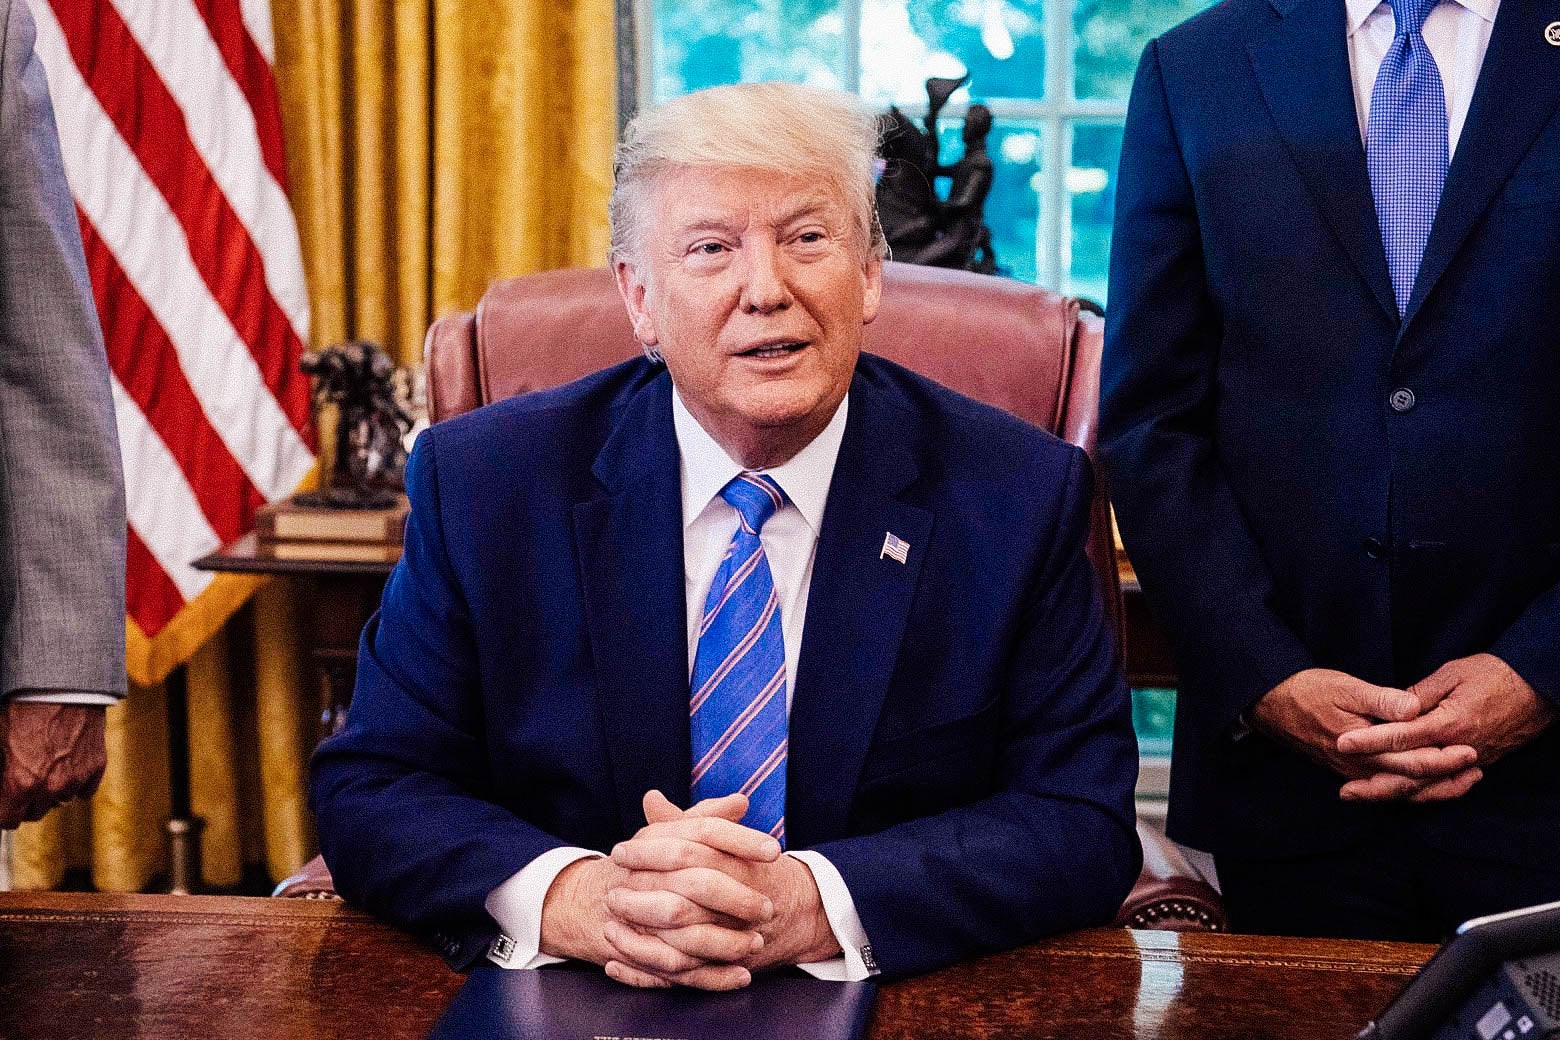 Donald Trump sits at his desk in the Oval Office.